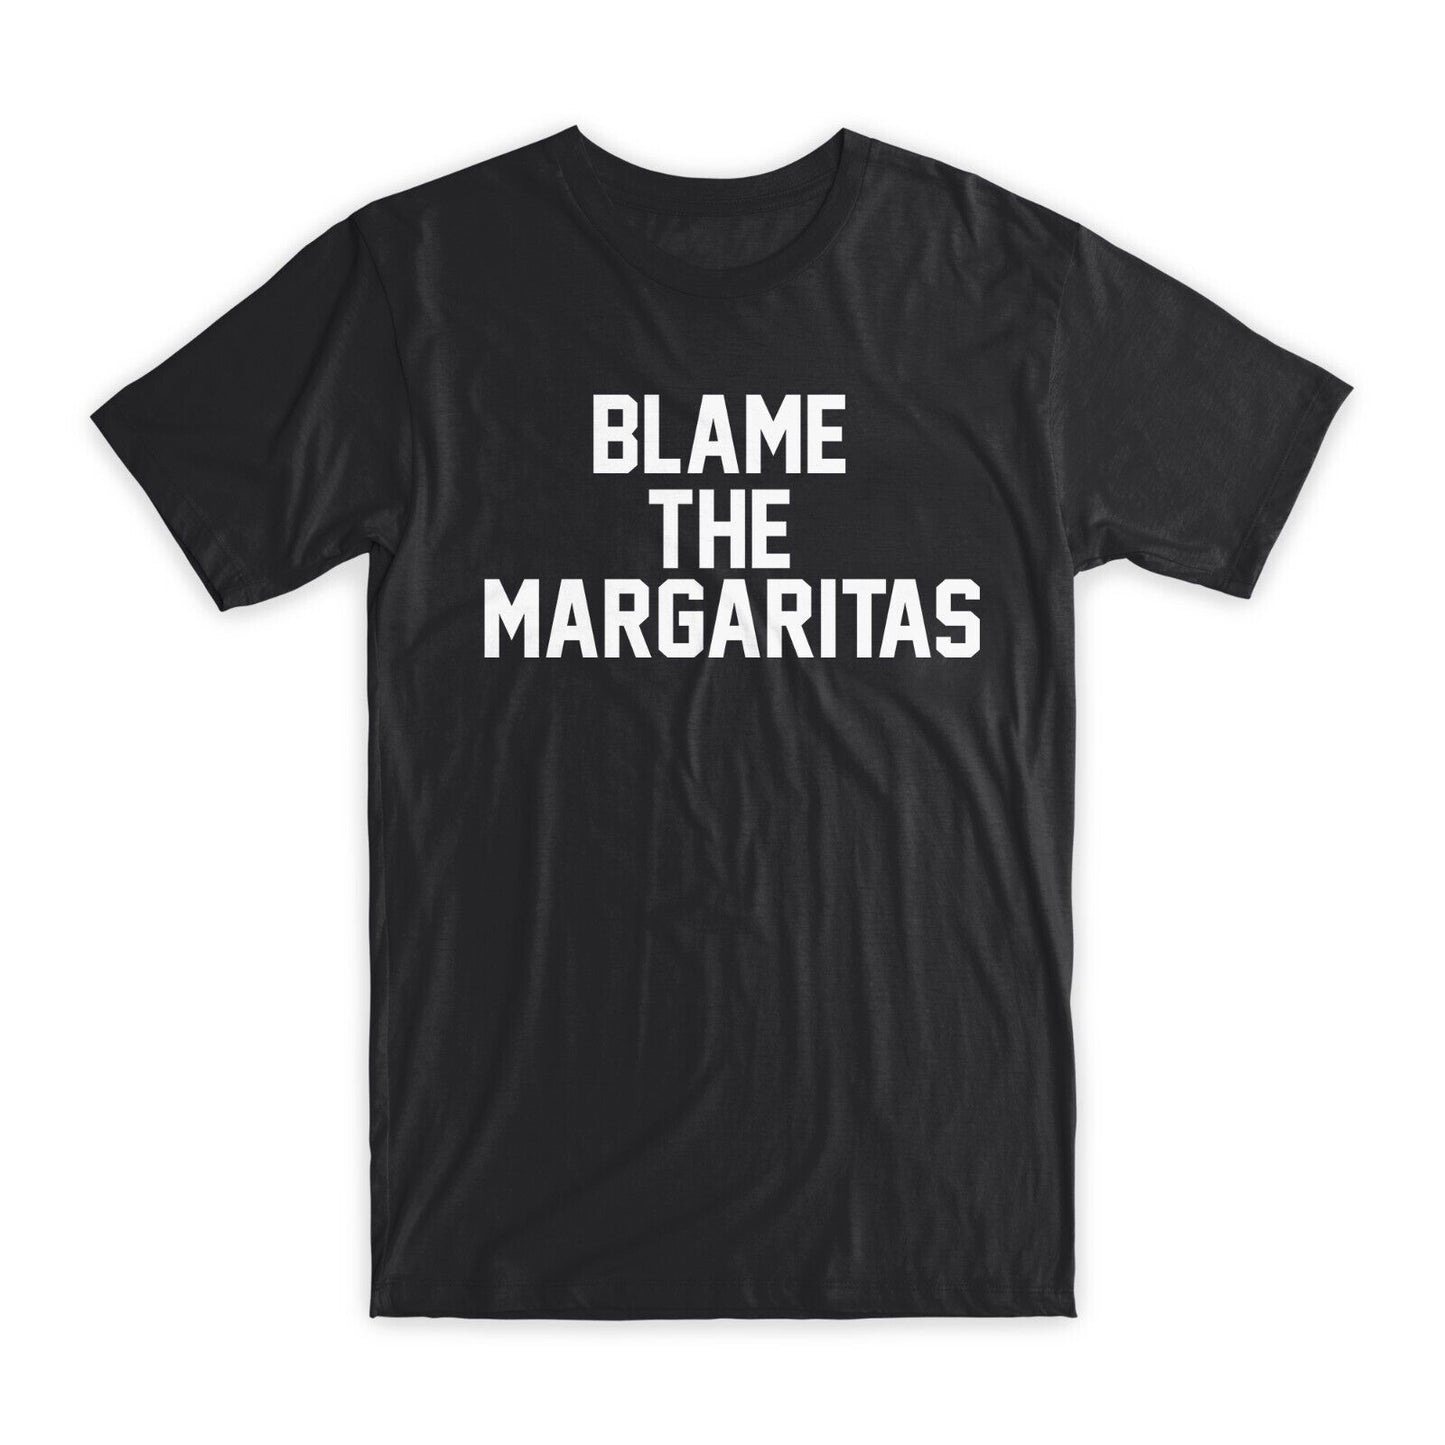 Blame The Margaritas T-Shirt Premium Soft Cotton Crew Neck Funny Tees Gifts NEW